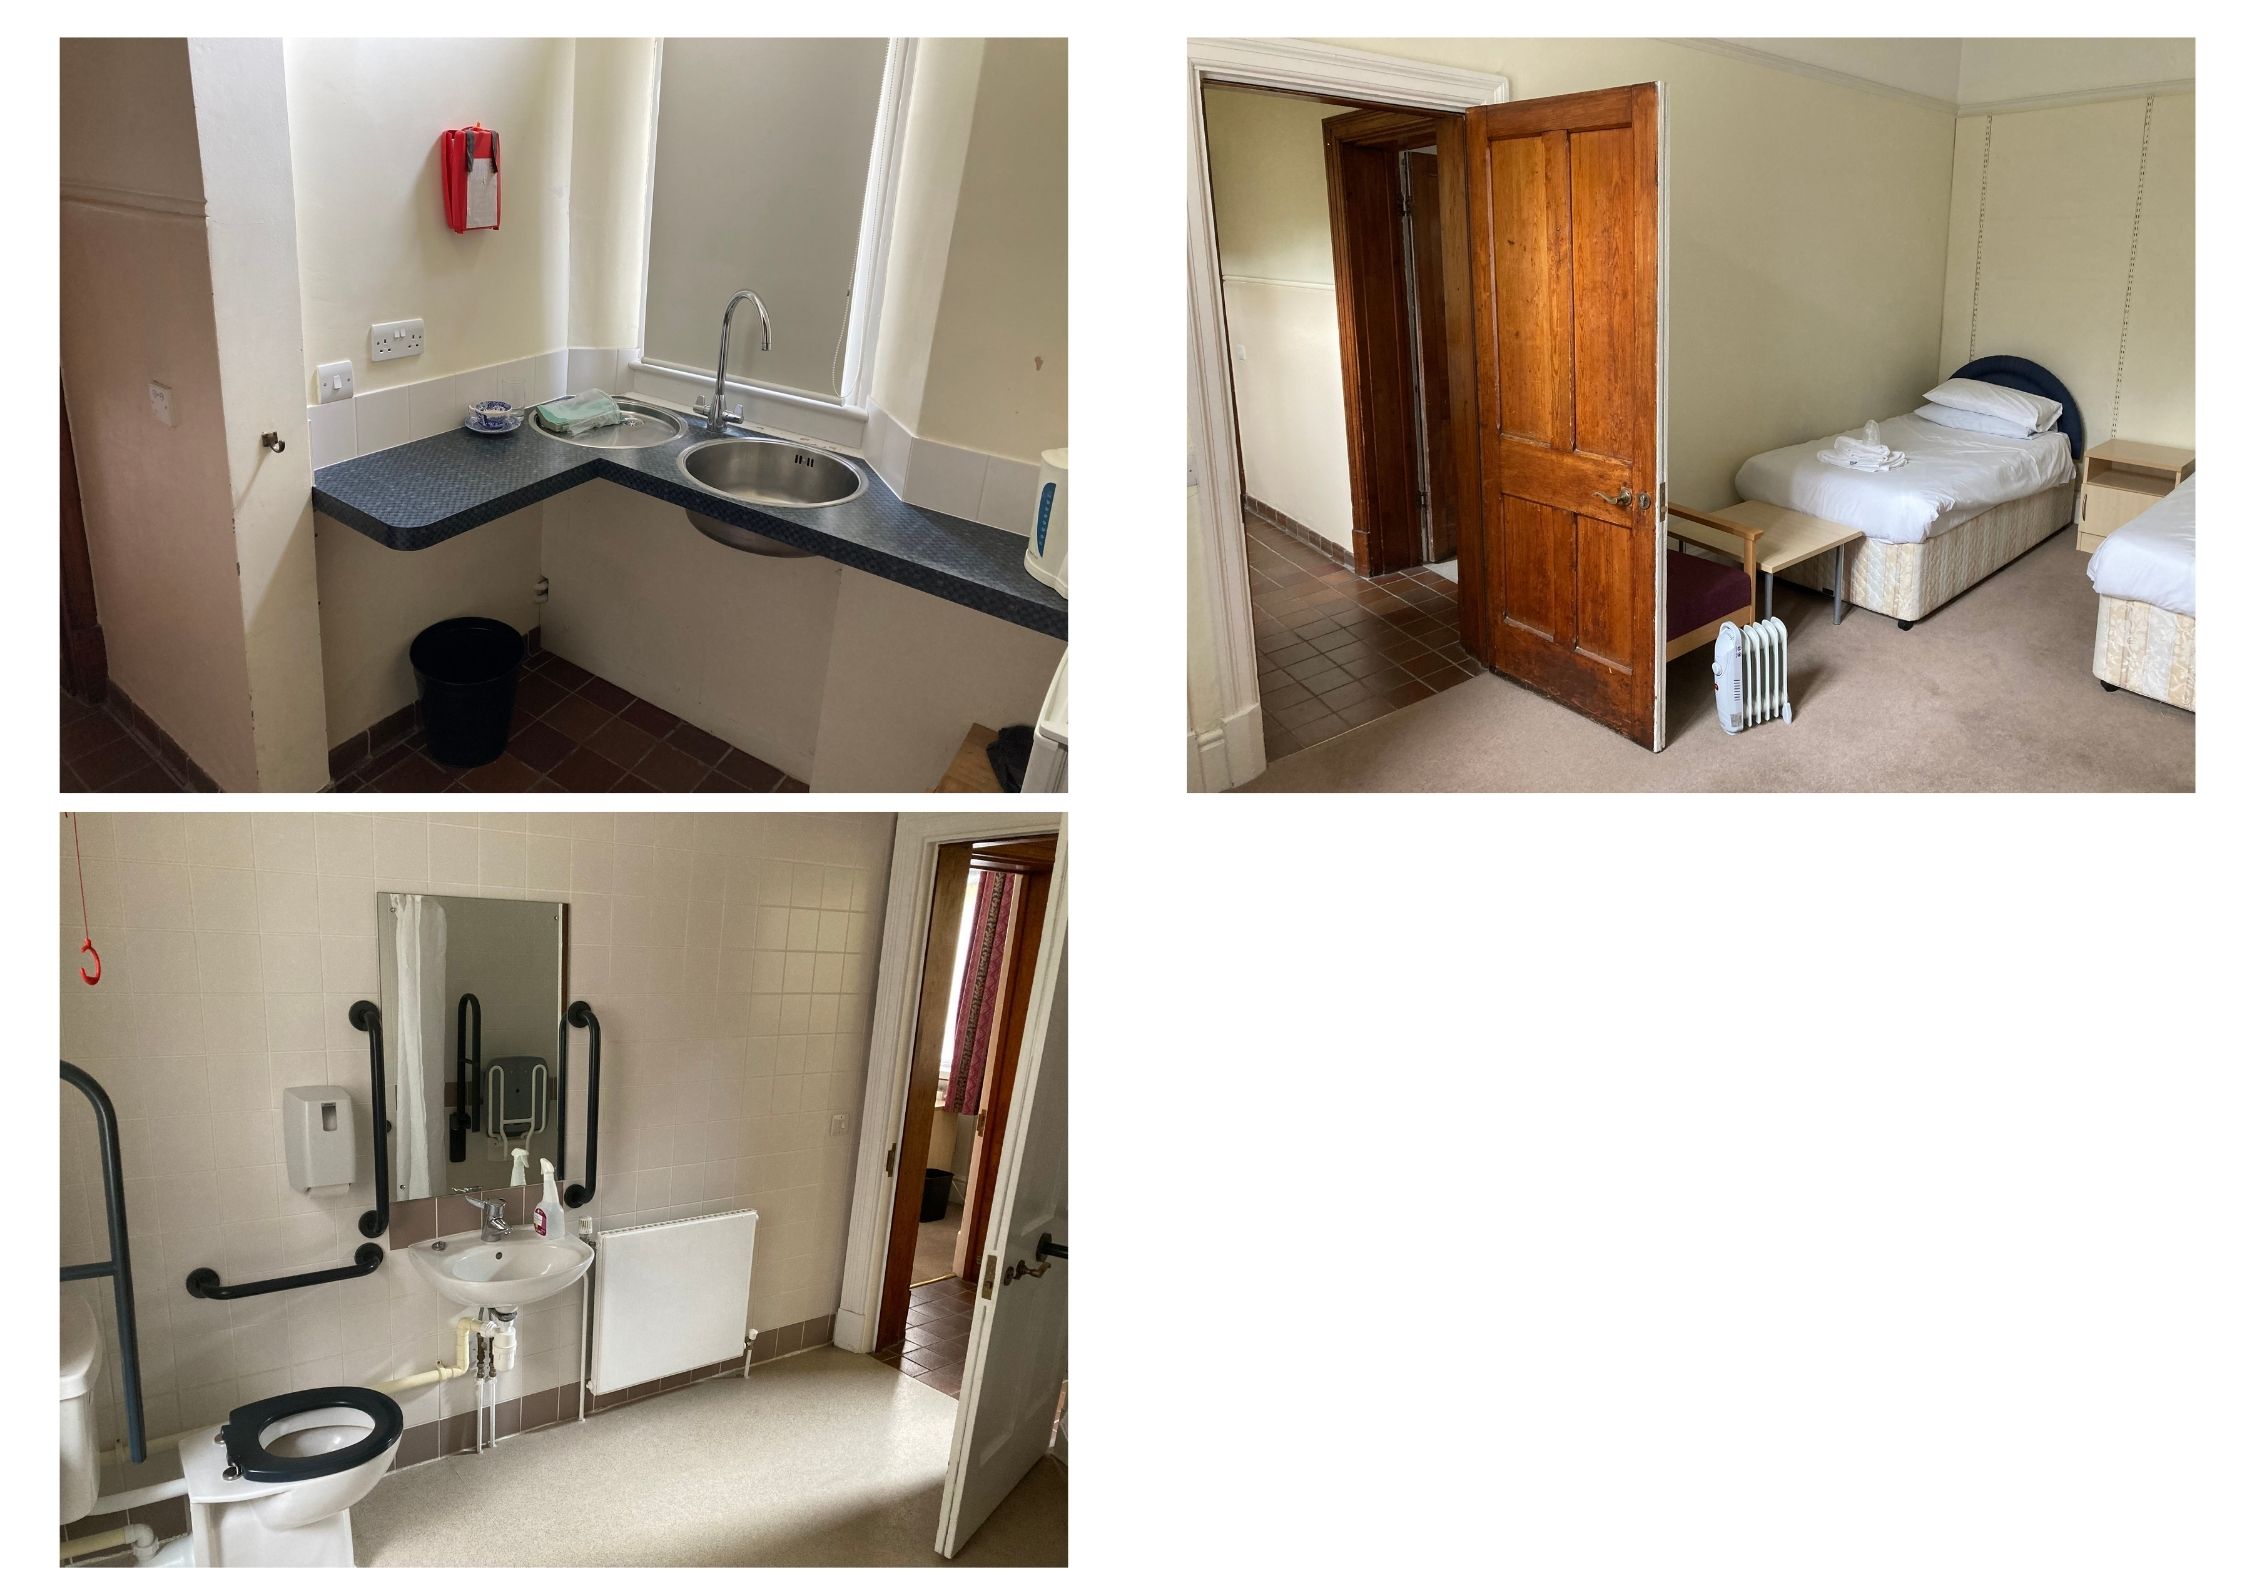 A montage of the accessible room in Old Courts showing the kitchen, bathroom and bedroom